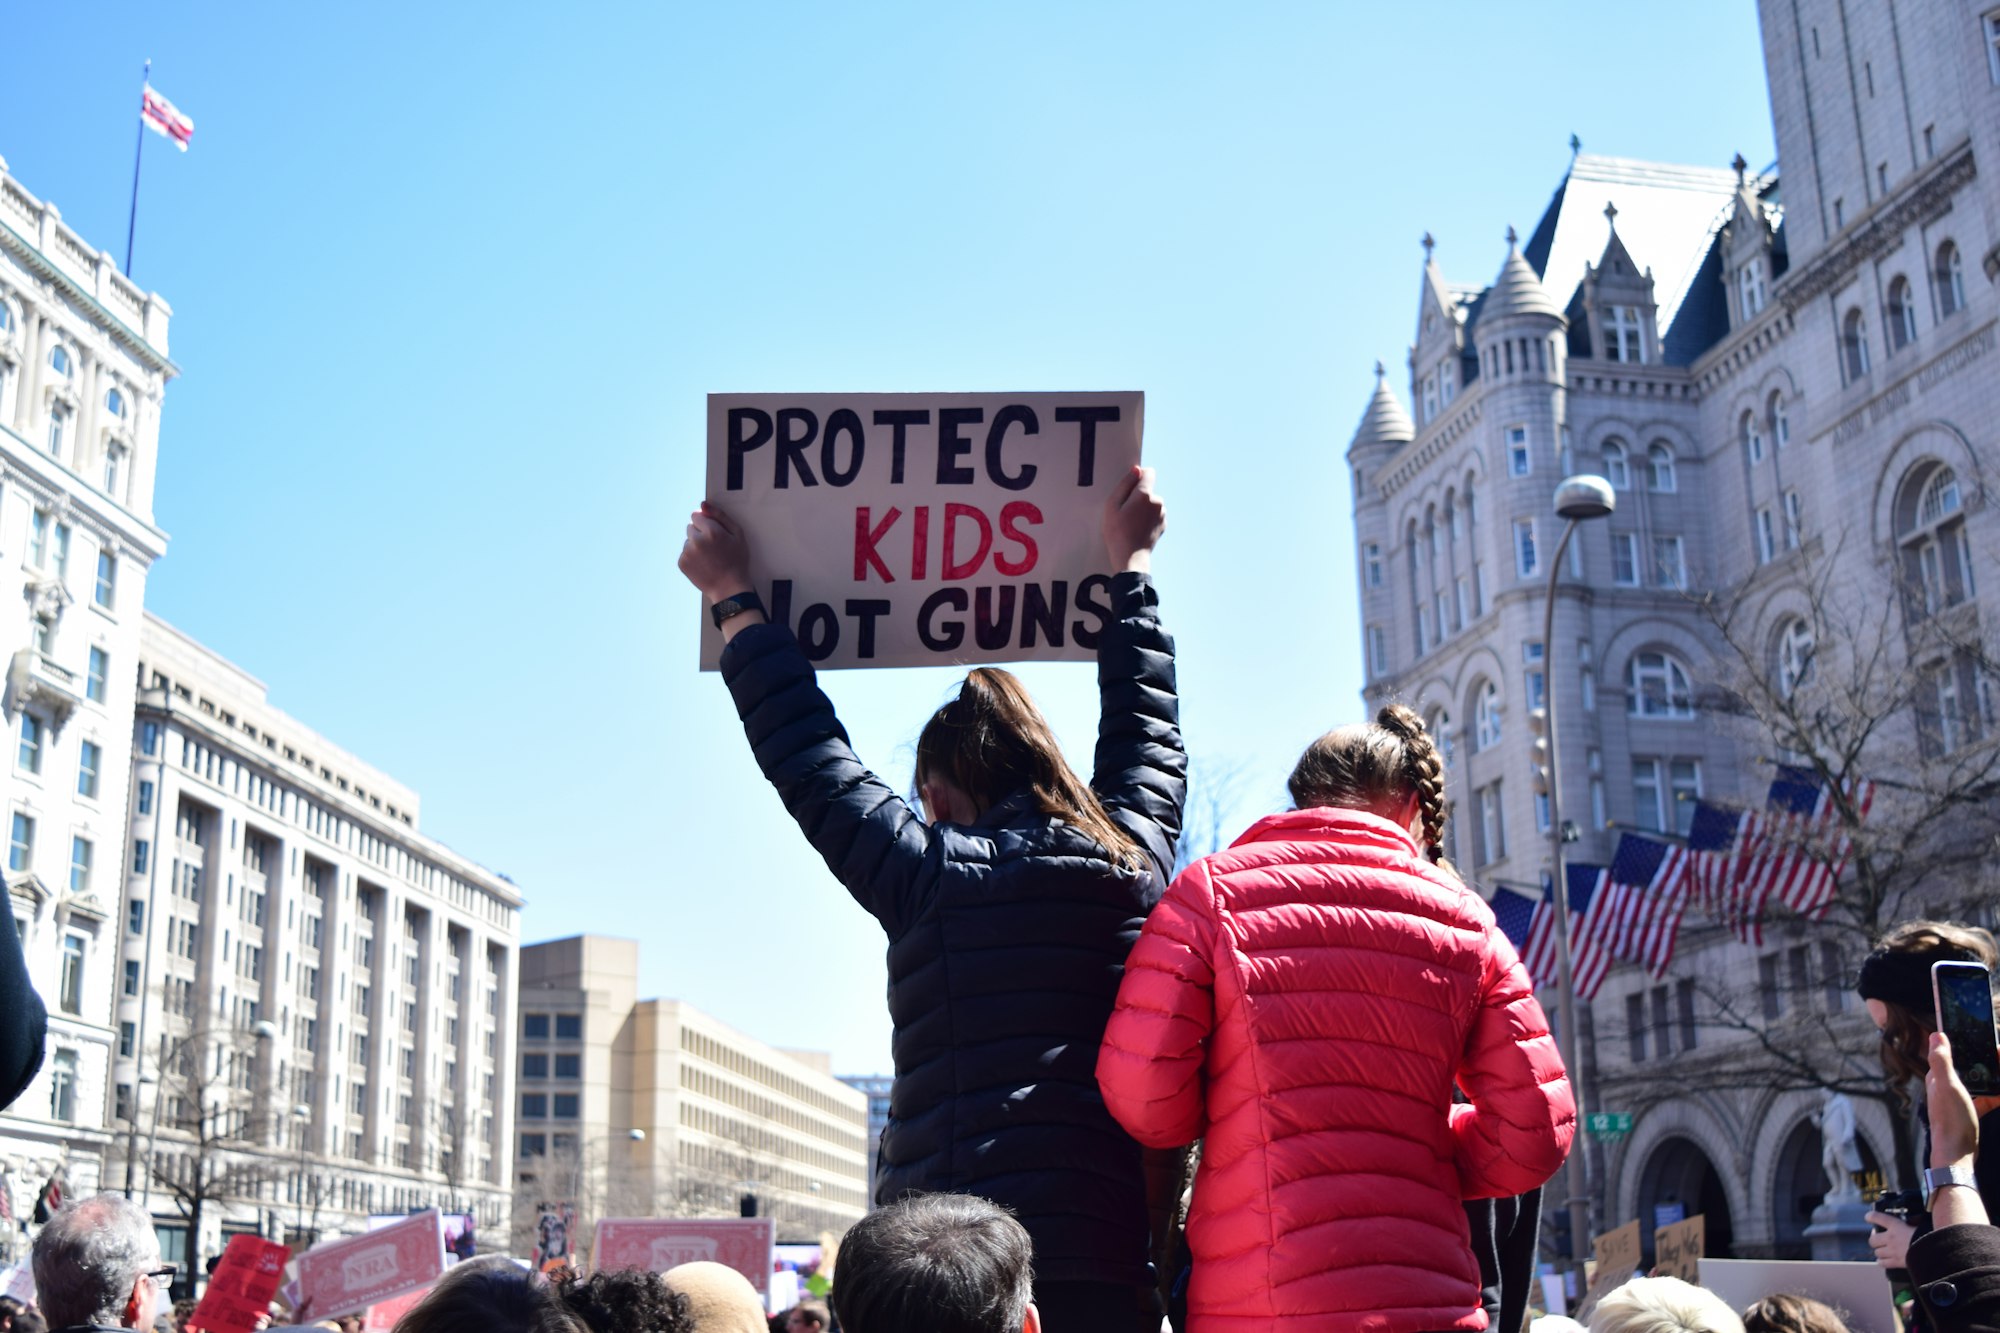 Near the Trump International Hotel (frame right), two young girls protest at the March For Our Lives rally in Washington, D.C.